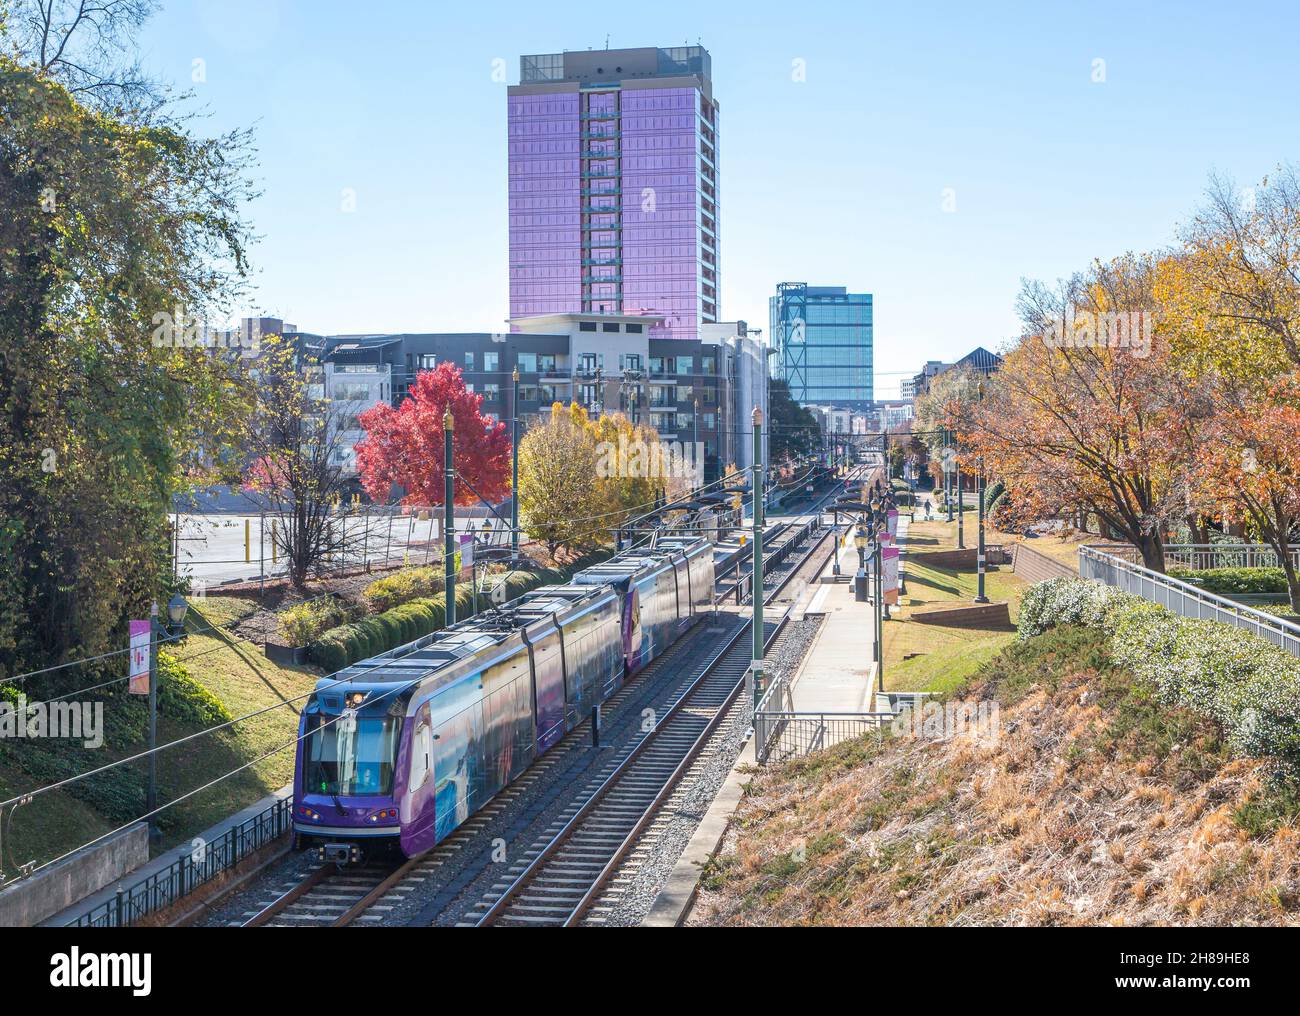 A light rail commuter train in Charlotte, North Carolina, with the South End district in the background. Stock Photo